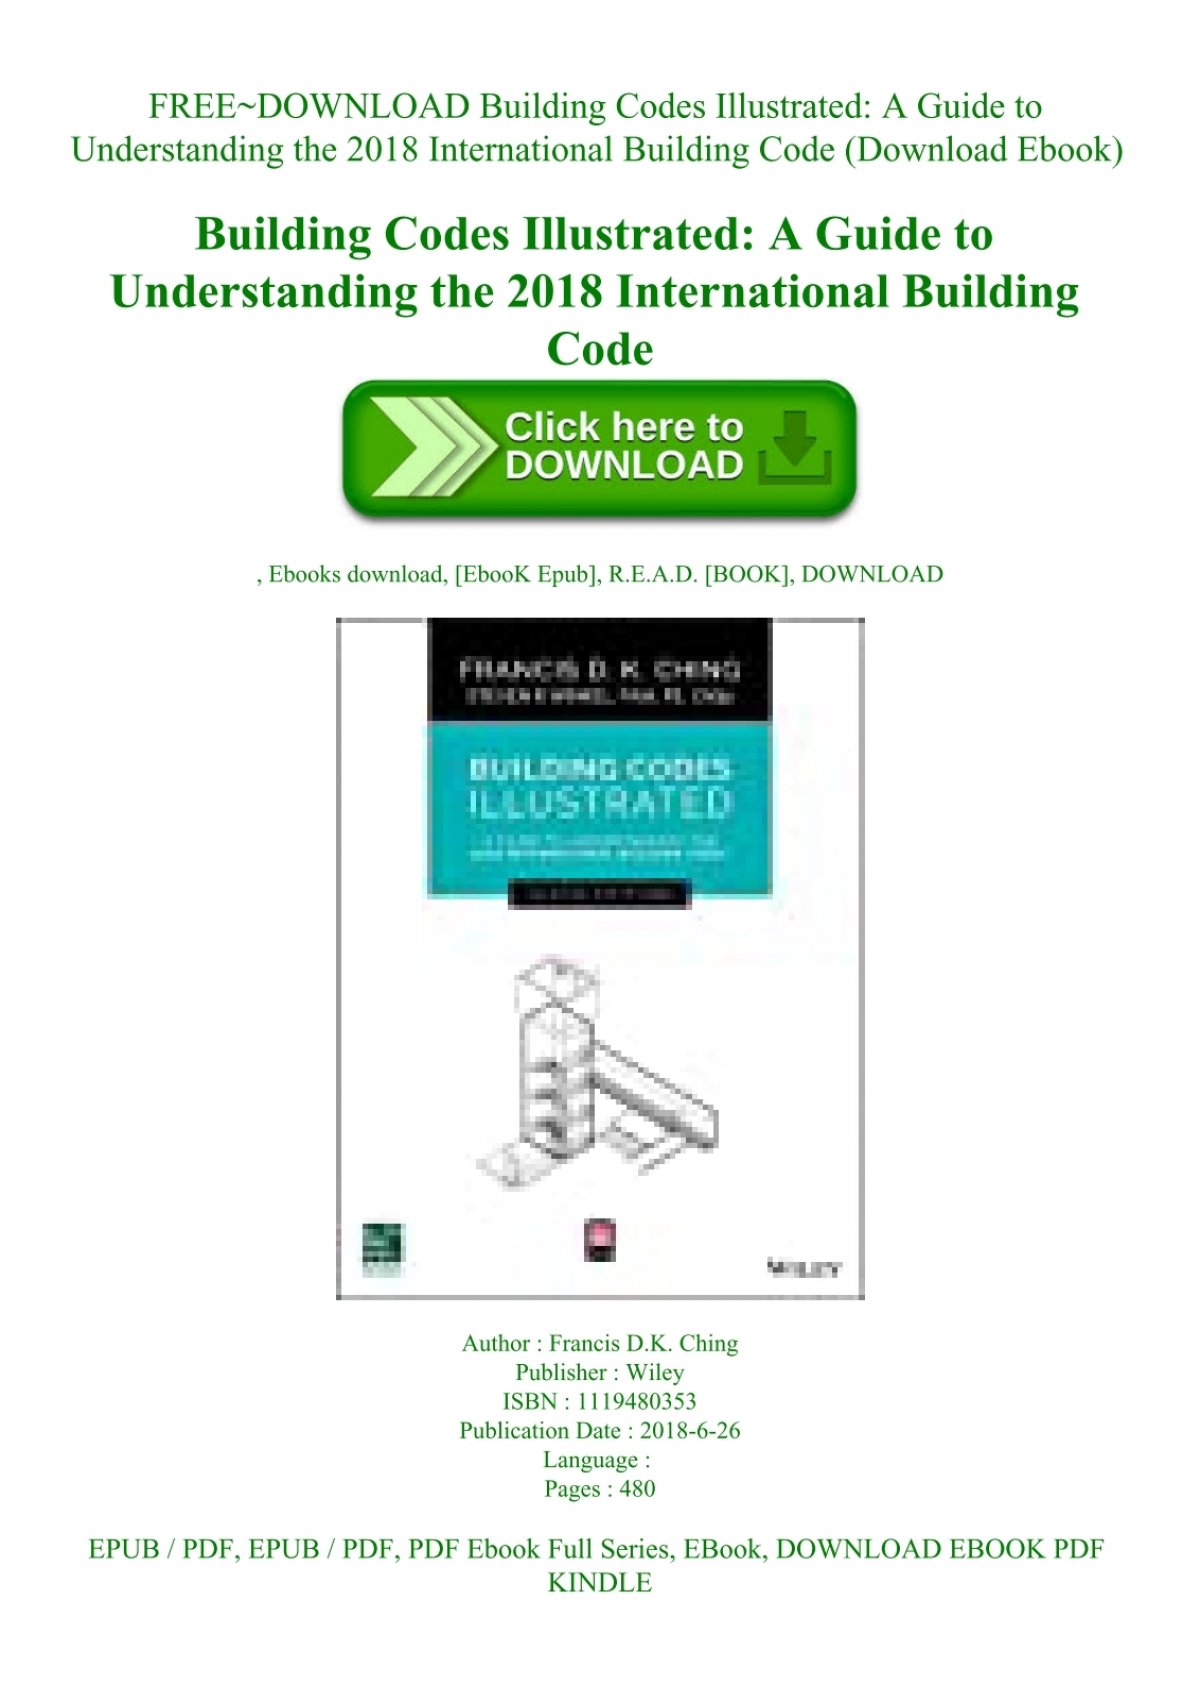 building code illustrated free download